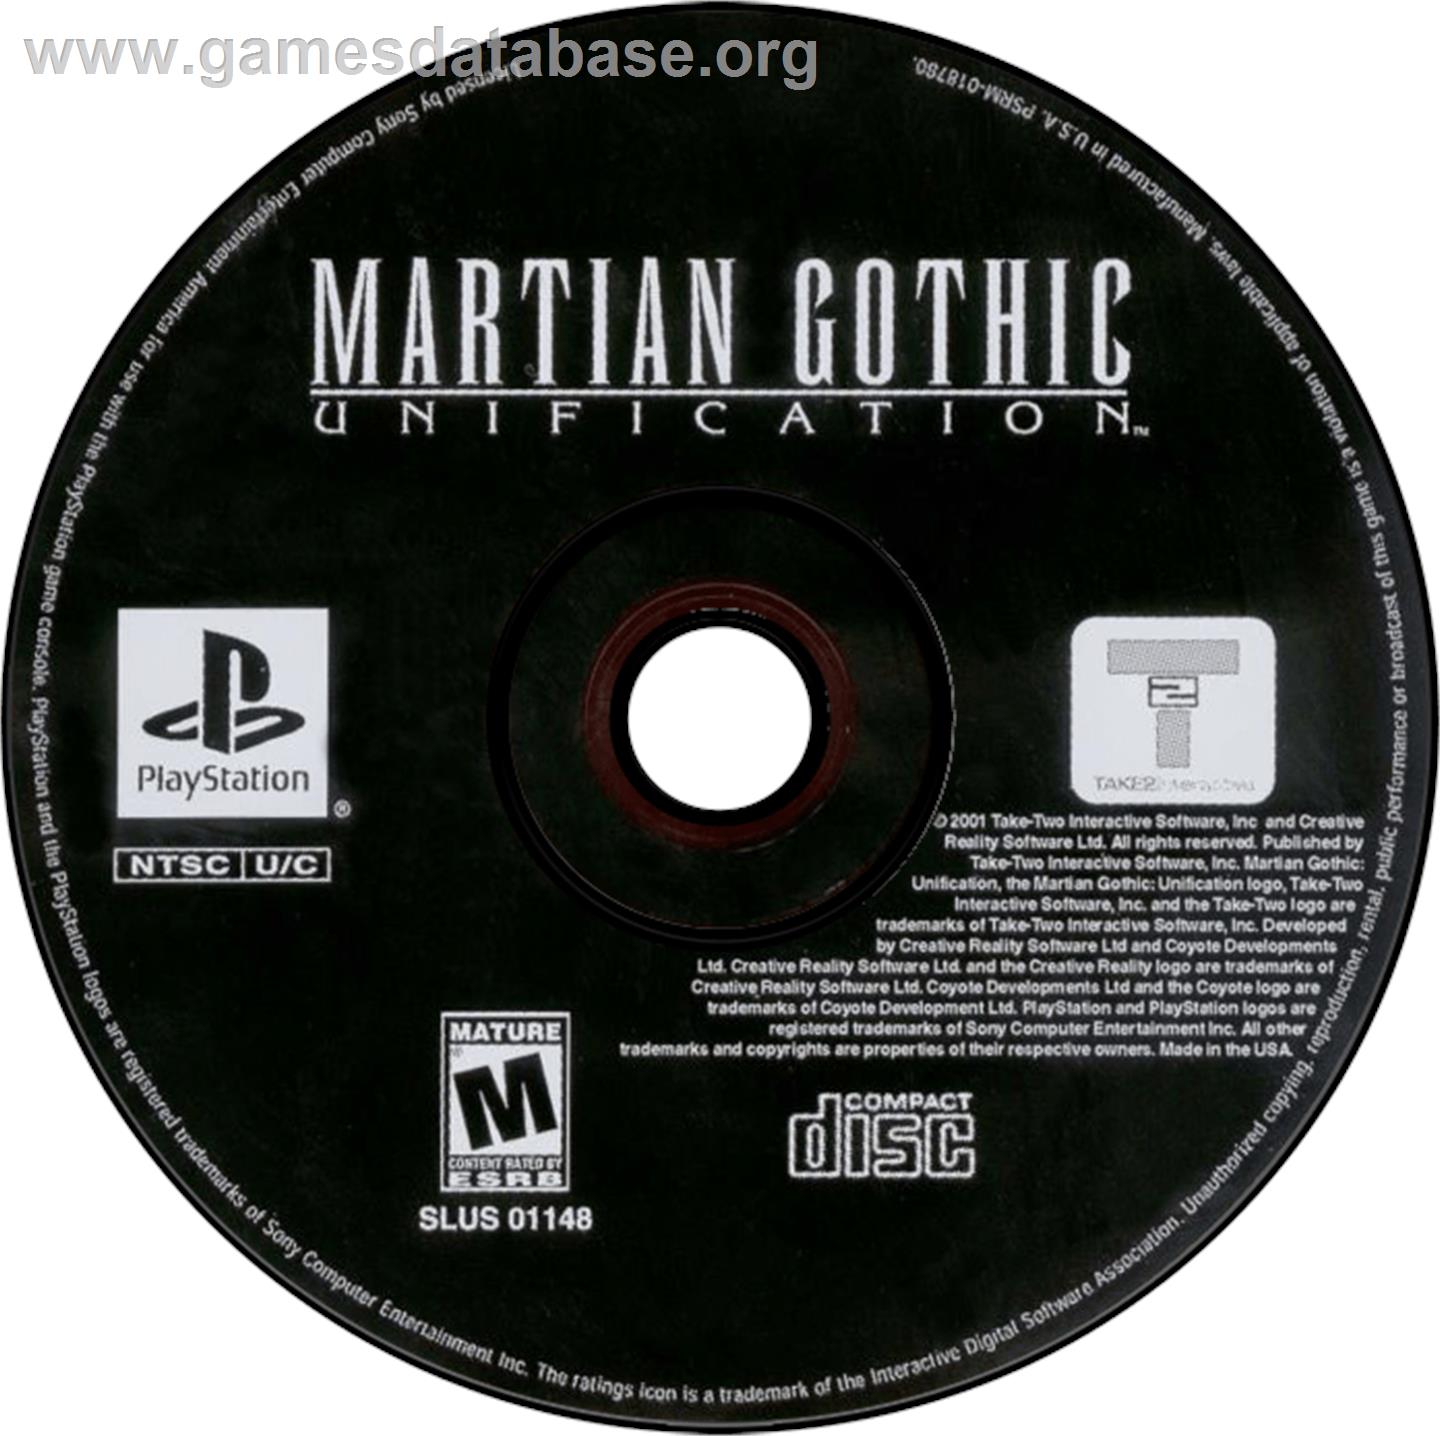 Martian Gothic: Unification - Sony Playstation - Artwork - Disc